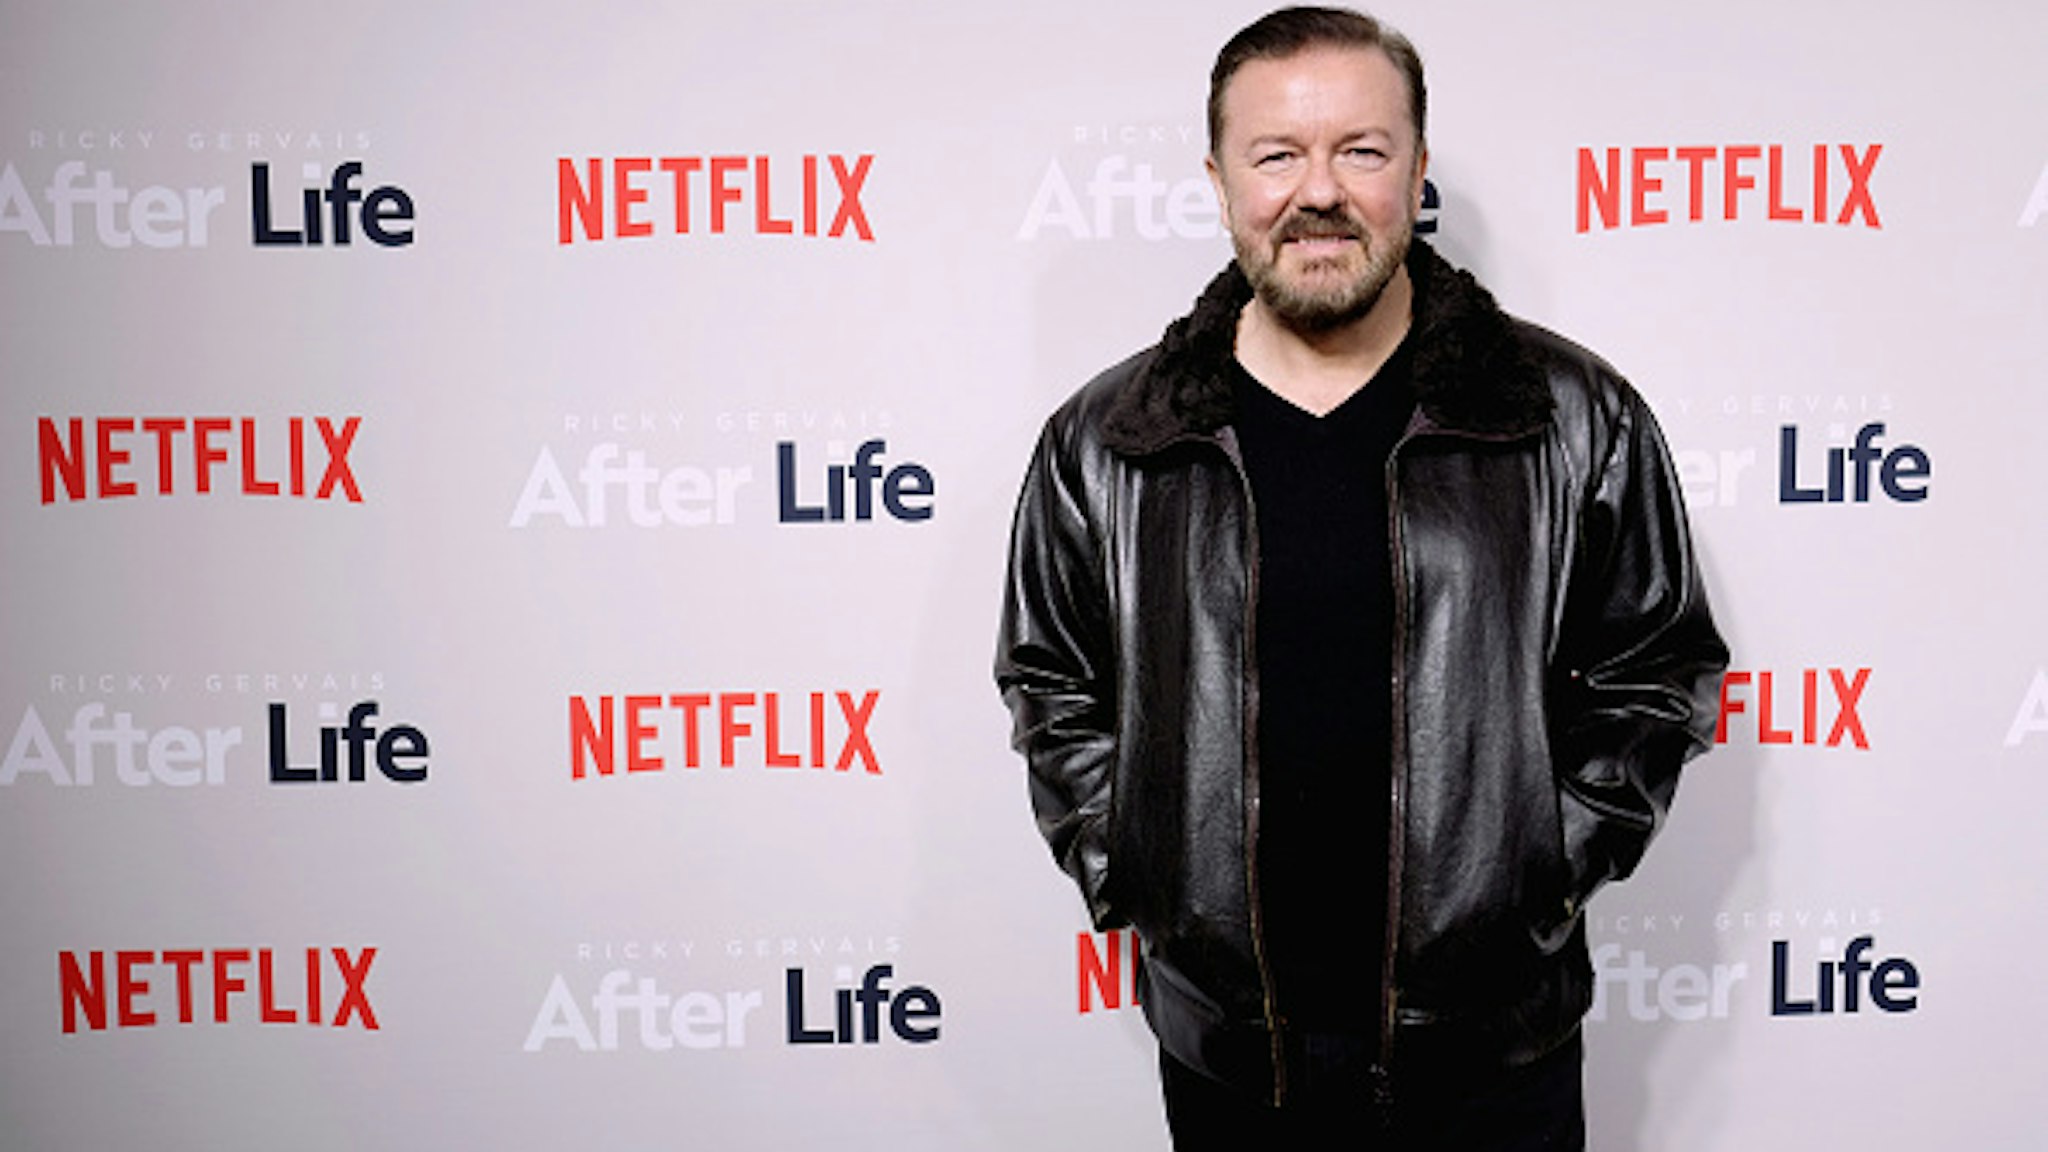 NEW YORK, NEW YORK - MARCH 07: Comedian Ricky Gervais attends the "After Life" For Your Consideration Event at Paley Center For Media on March 07, 2019 in New York City.